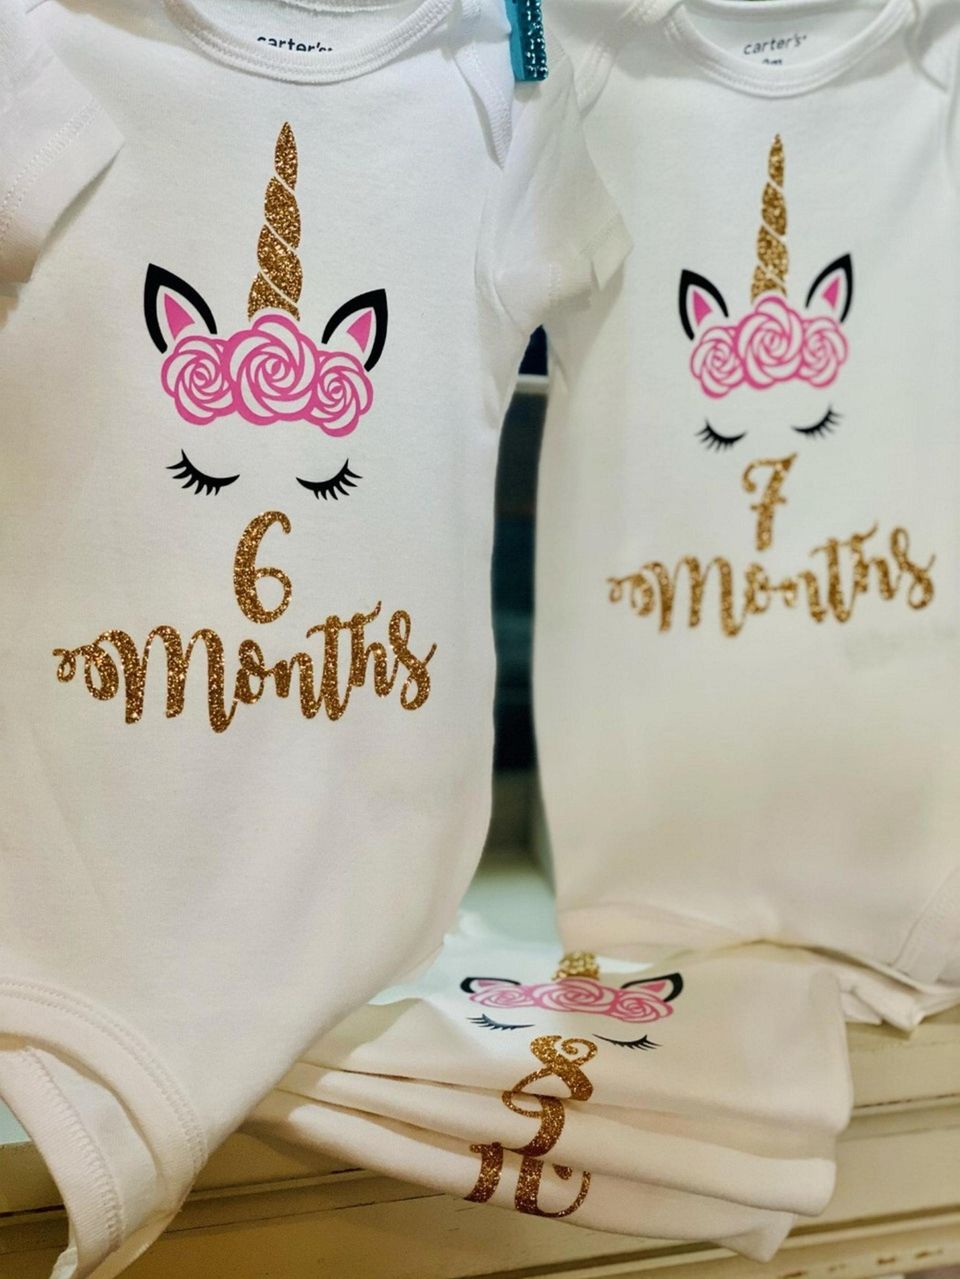 A personalized onesie makes for a super cute